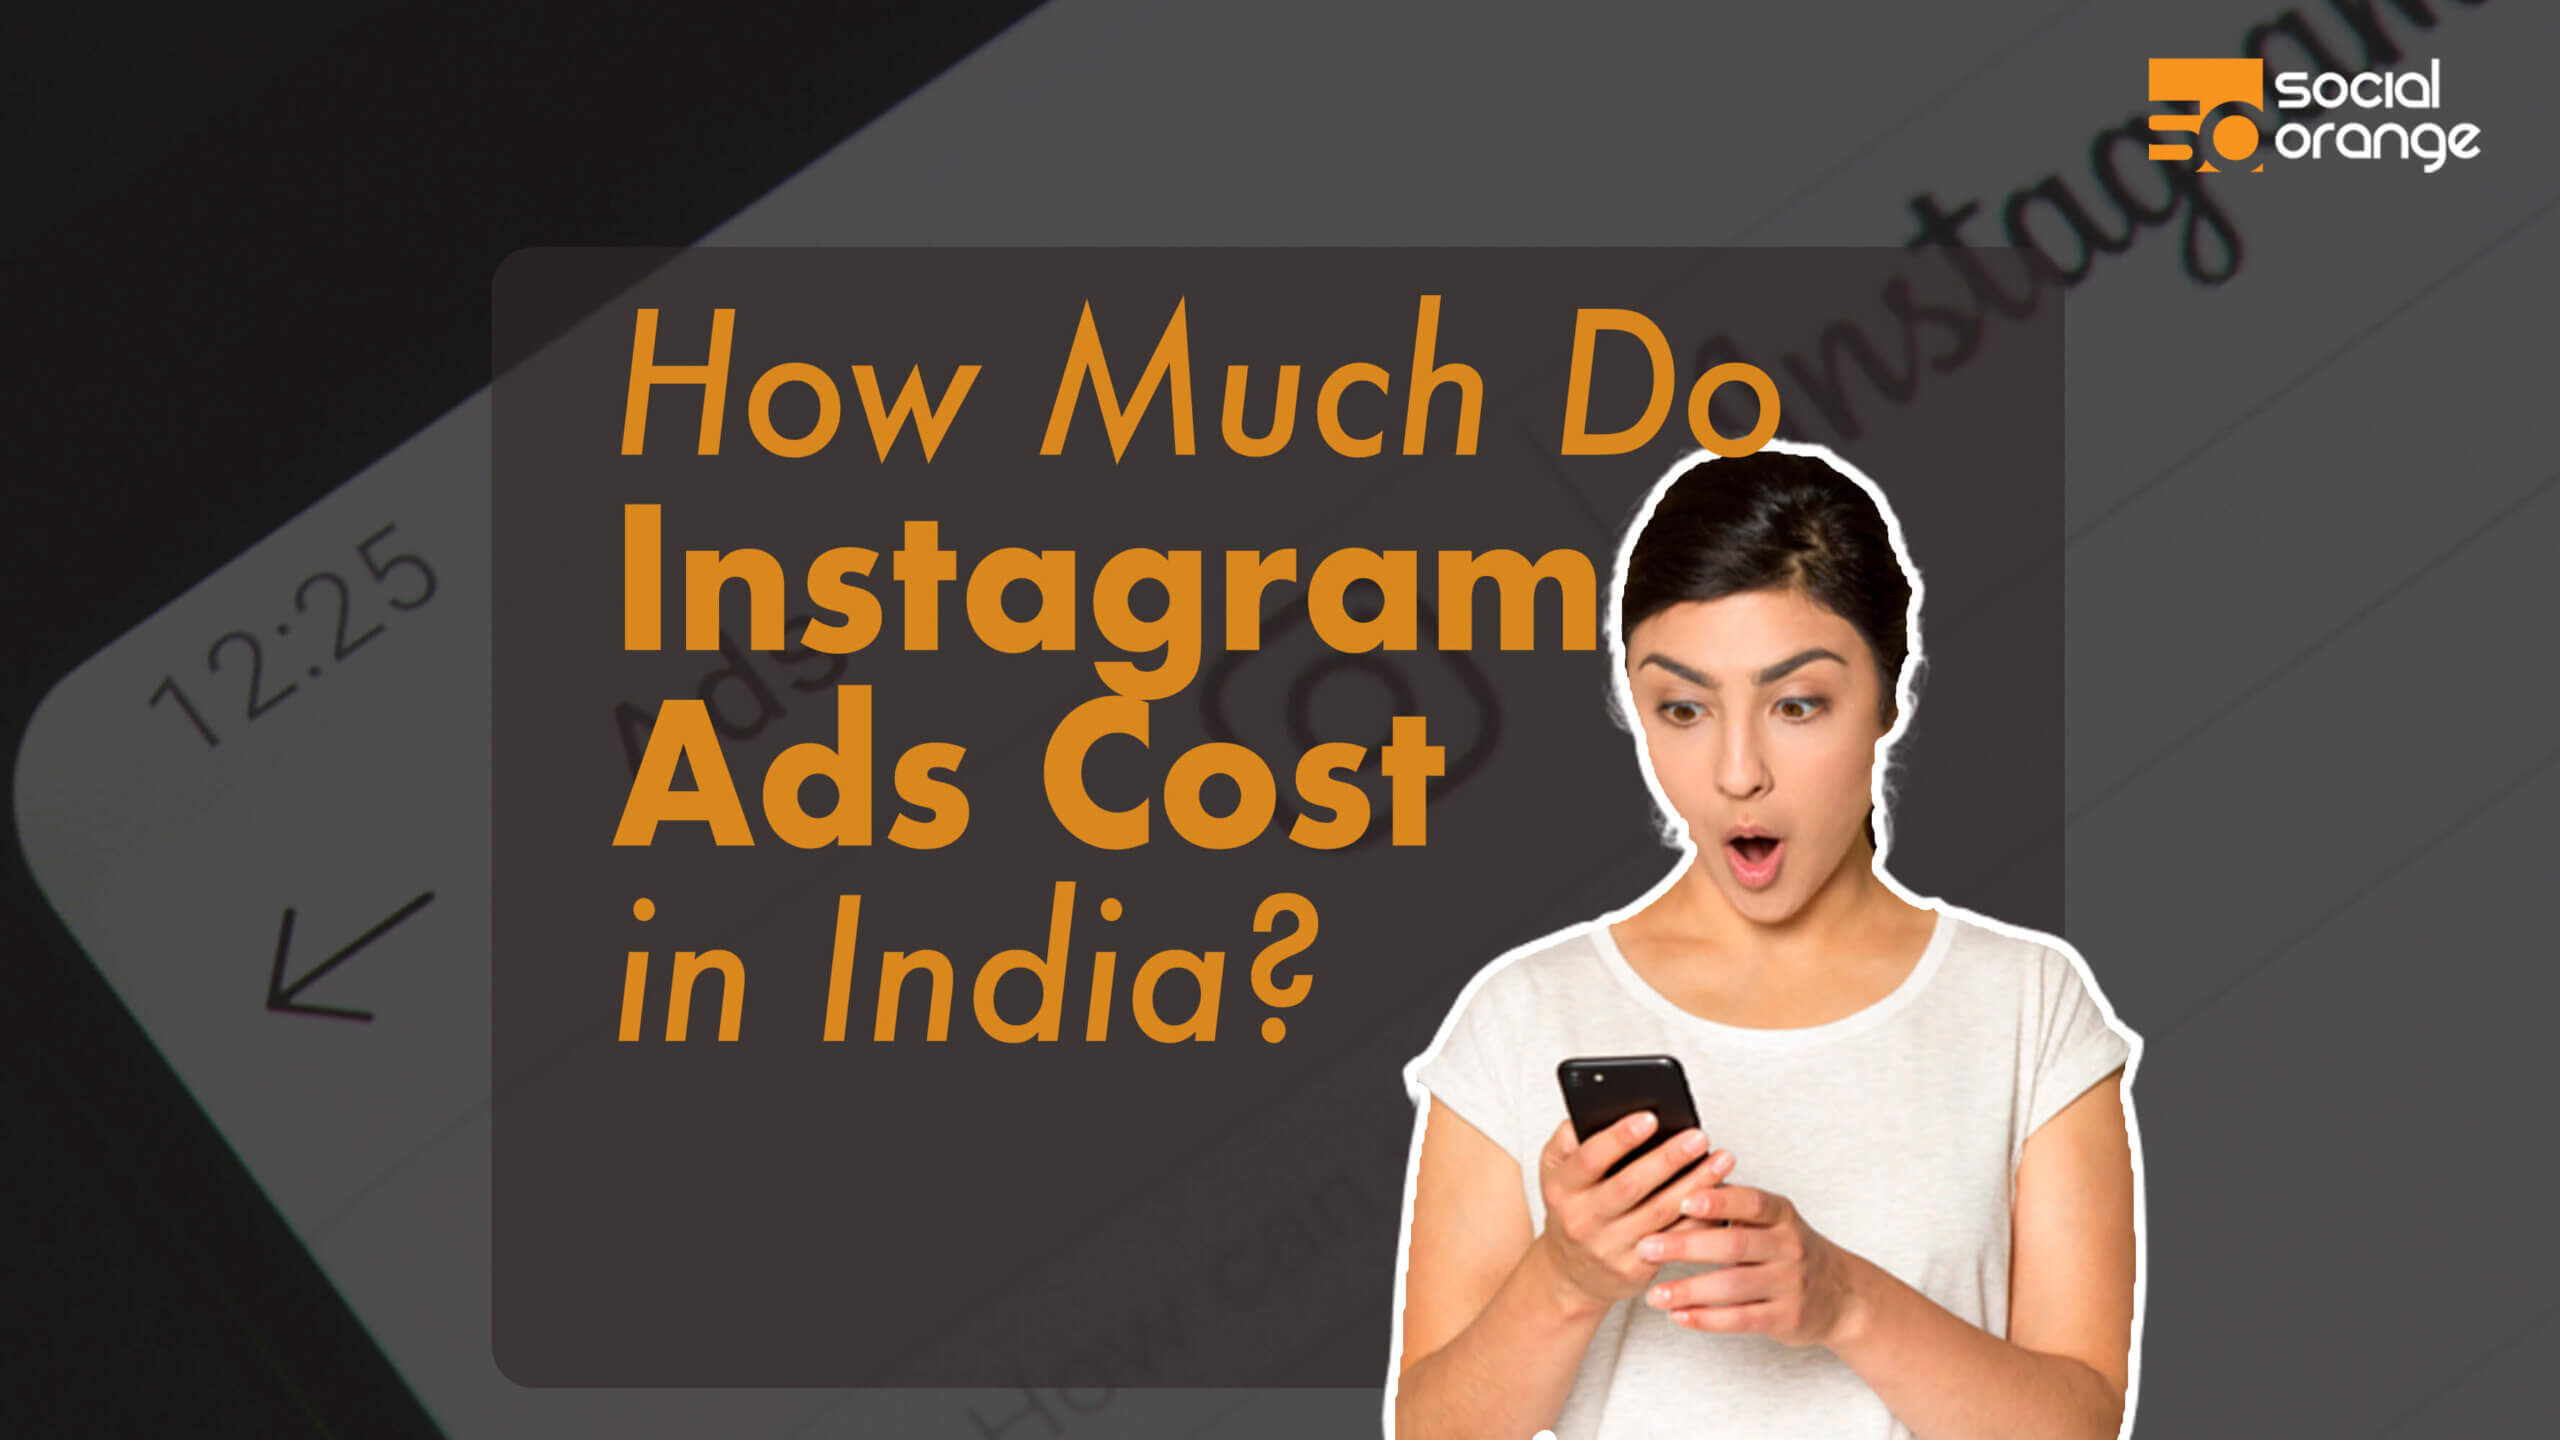 How Much Do Instagram Ads Cost in India